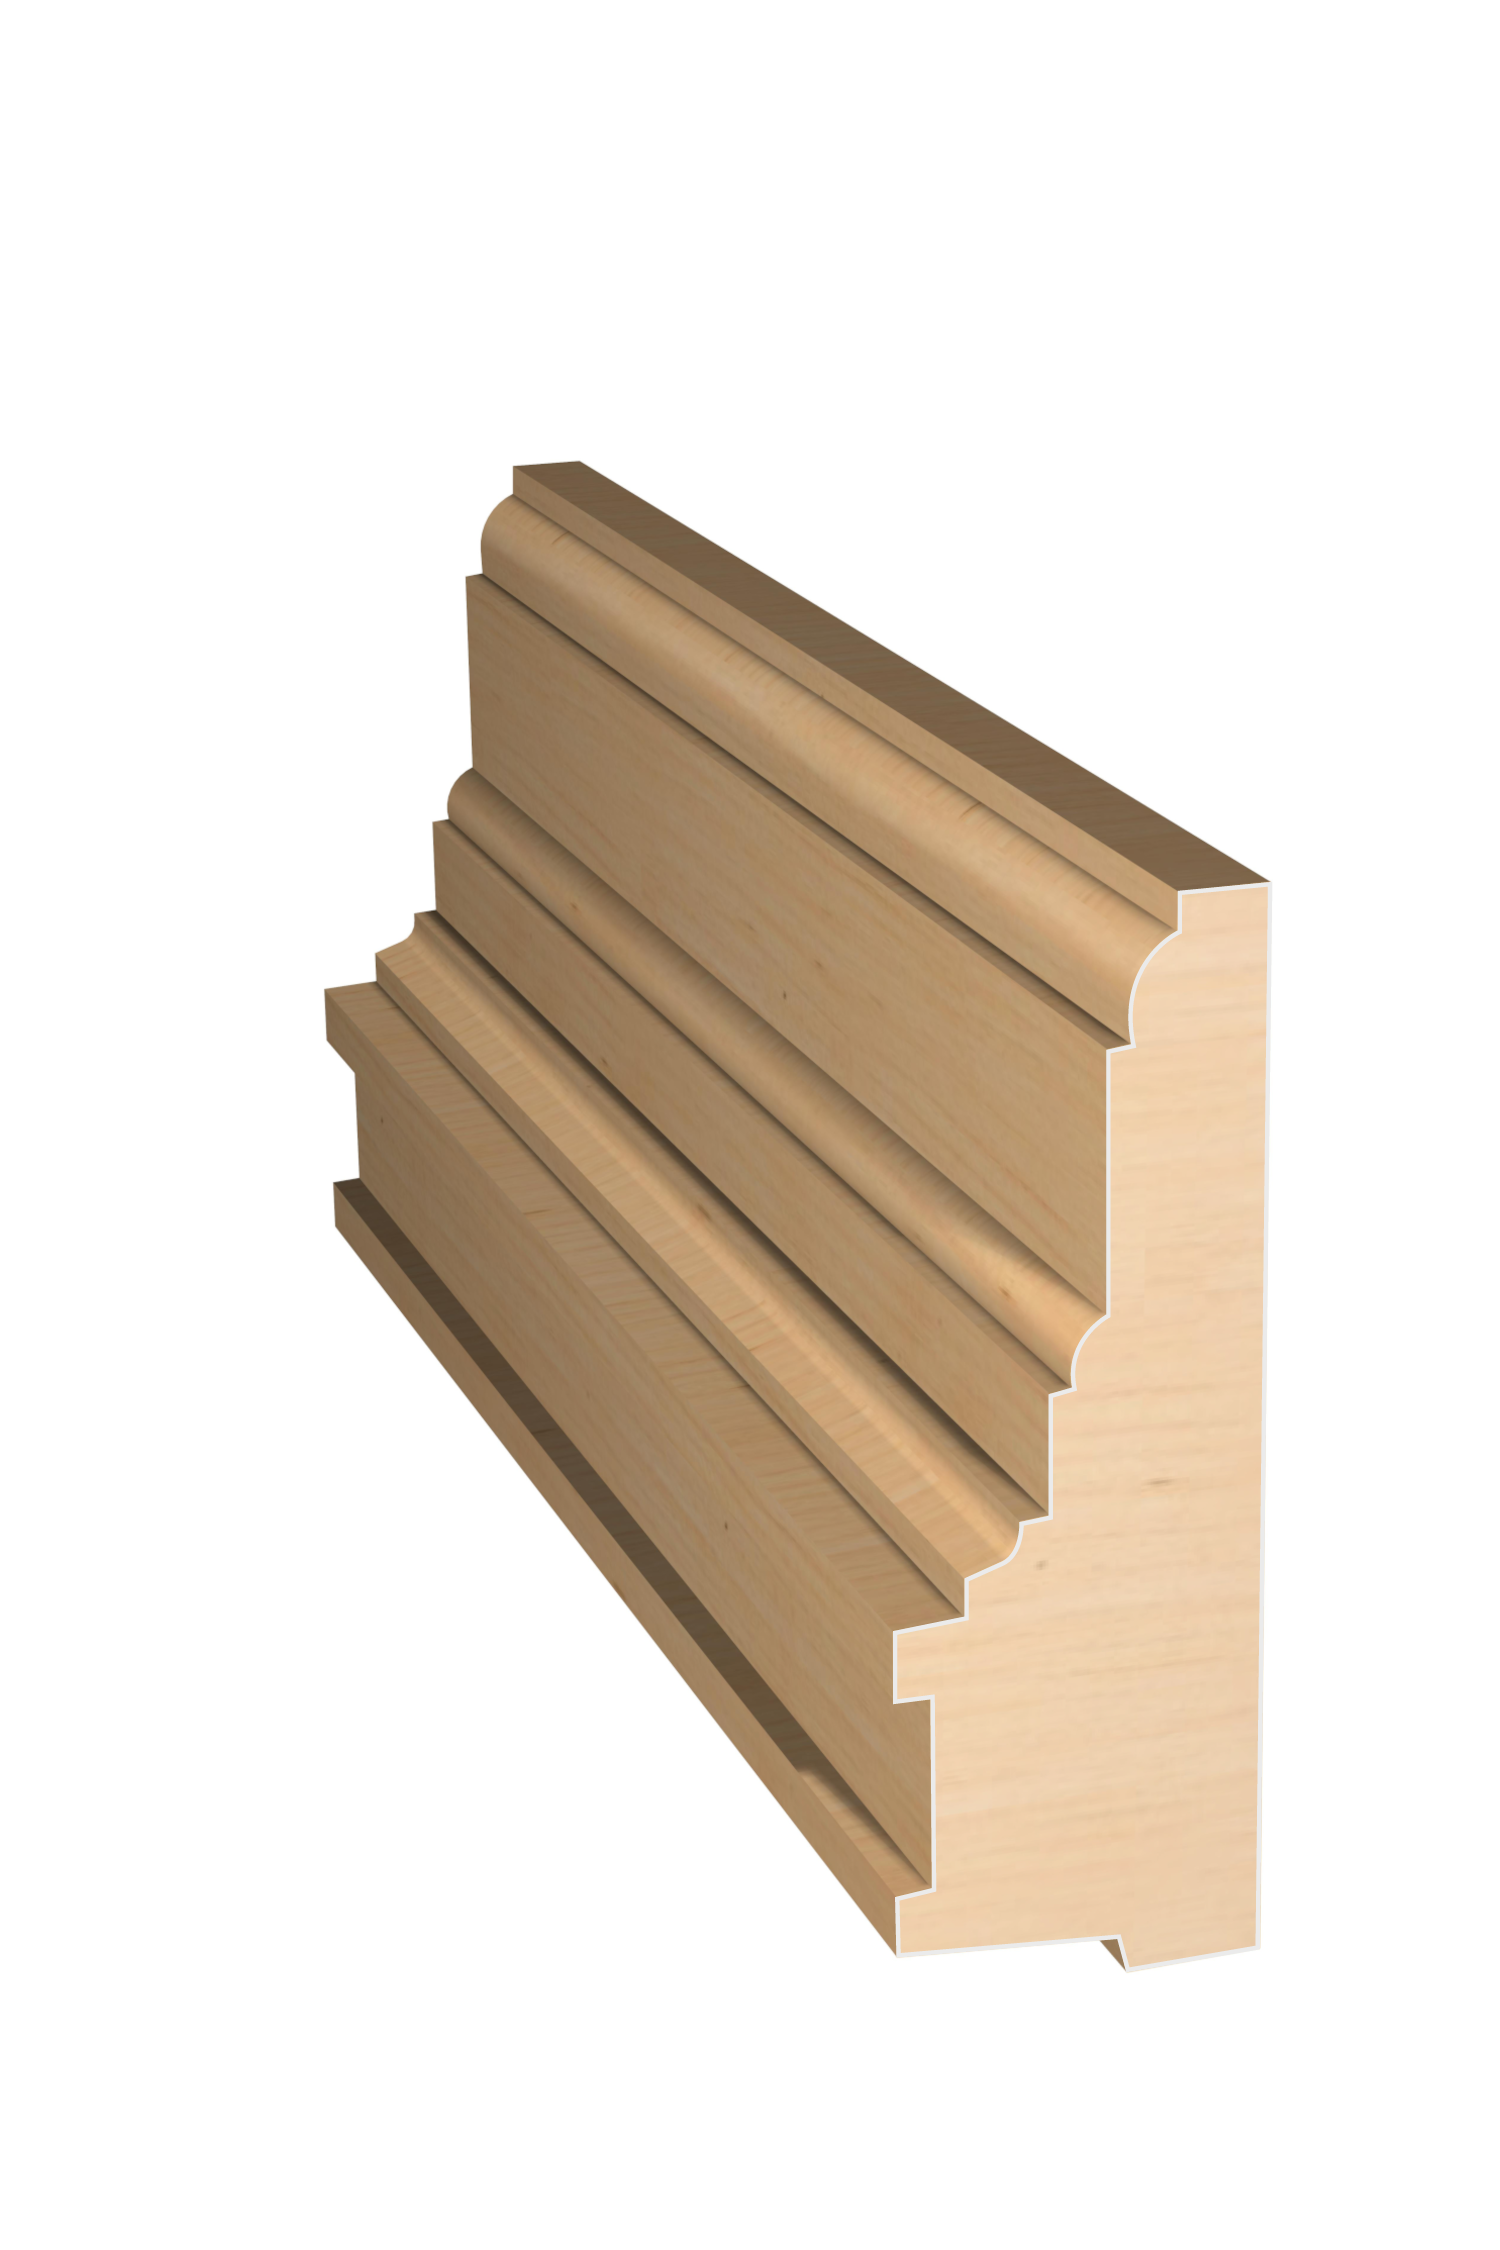 Three dimensional rendering of custom casing wood molding CAPL2782 made by Public Lumber Company in Detroit.